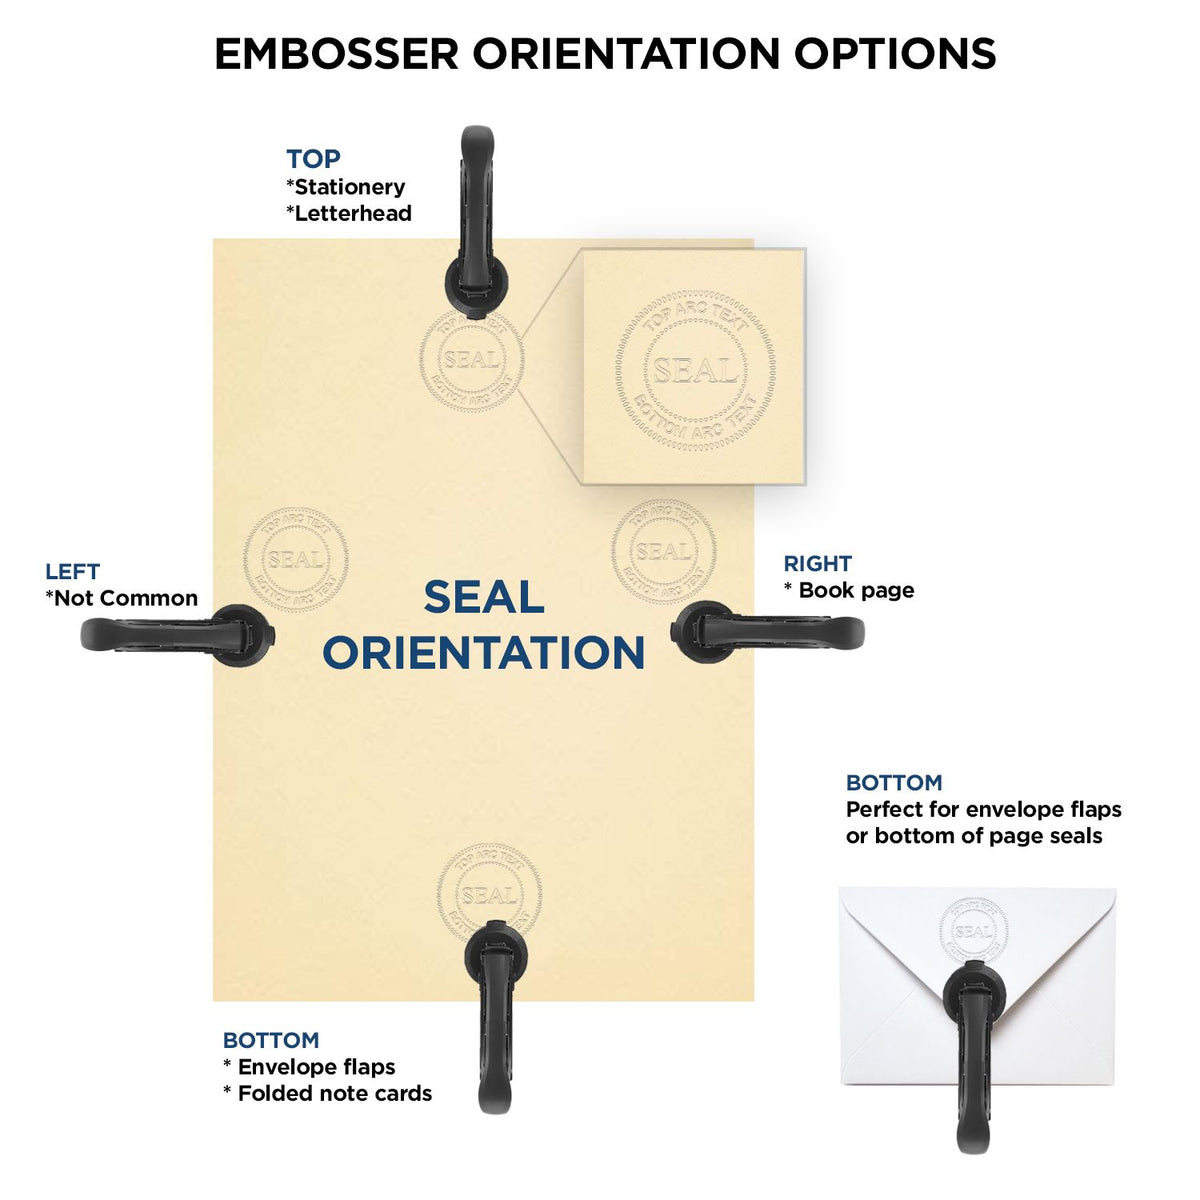 An infographic for the State of New Jersey Extended Long Reach Engineer Seal showing embosser orientation, this is showing examples of a top, bottom, right and left insert.